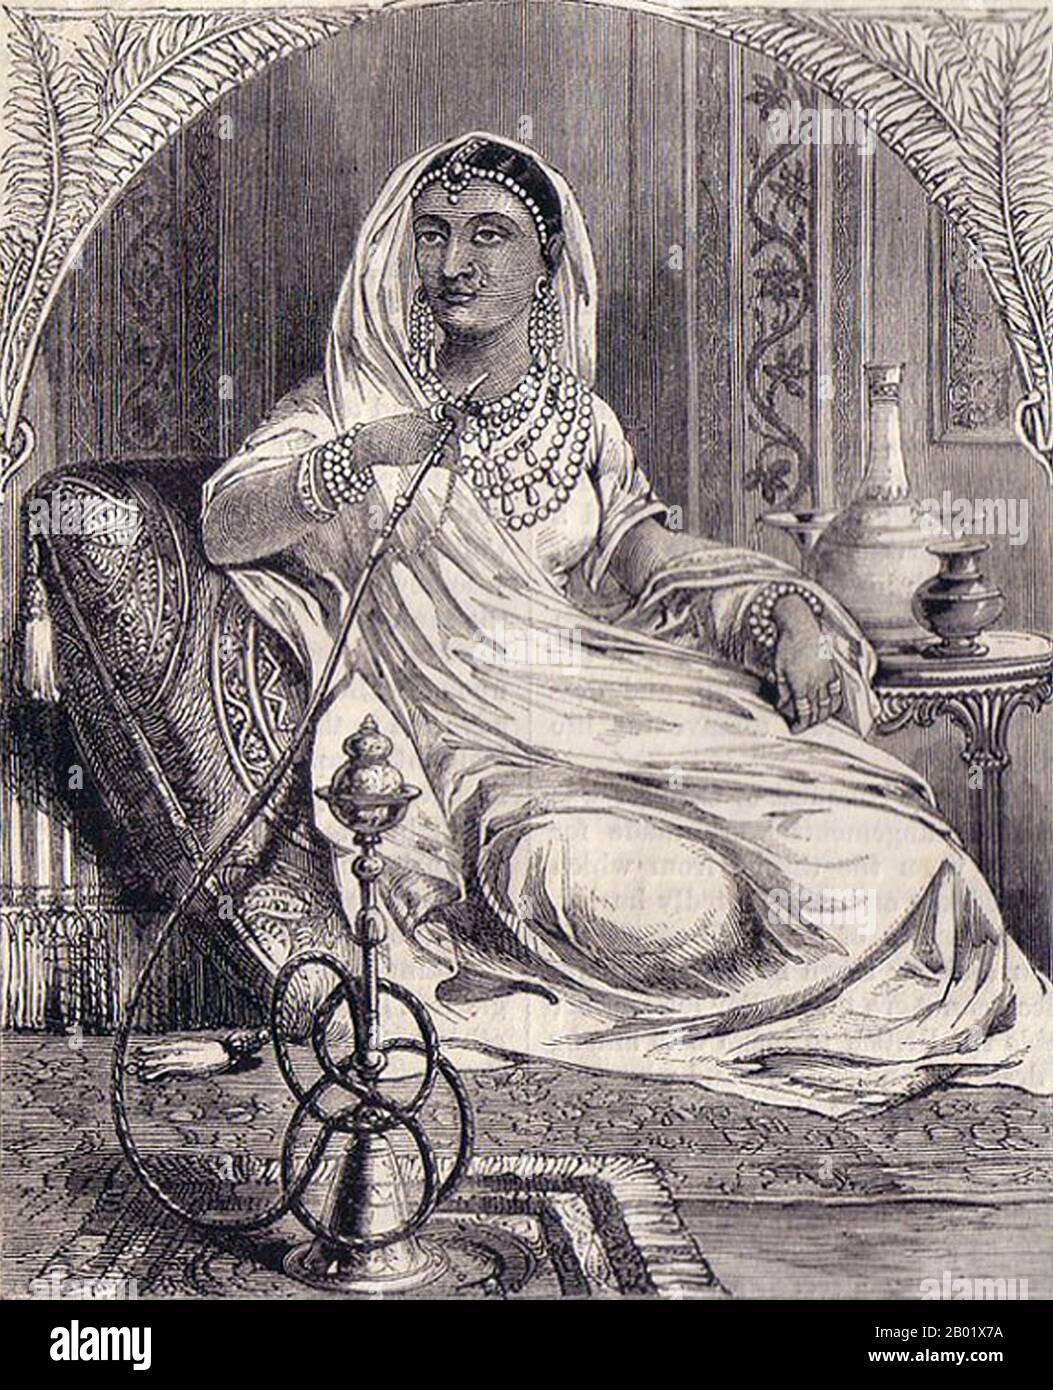 Lakshmi Bai, the Rani of Jhansi (c.19 November 1835 – 17 June 1858, (Marathi- झाशीची राणी लक्ष्मीबाई) was the queen of the Maratha-ruled princely state of Jhansi, situated in the north-central part of India.  She was one of the leading figures of the Indian Rebellion of 1857 and a symbol of resistance to the rule of the British East India Company in the subcontinent. Stock Photo